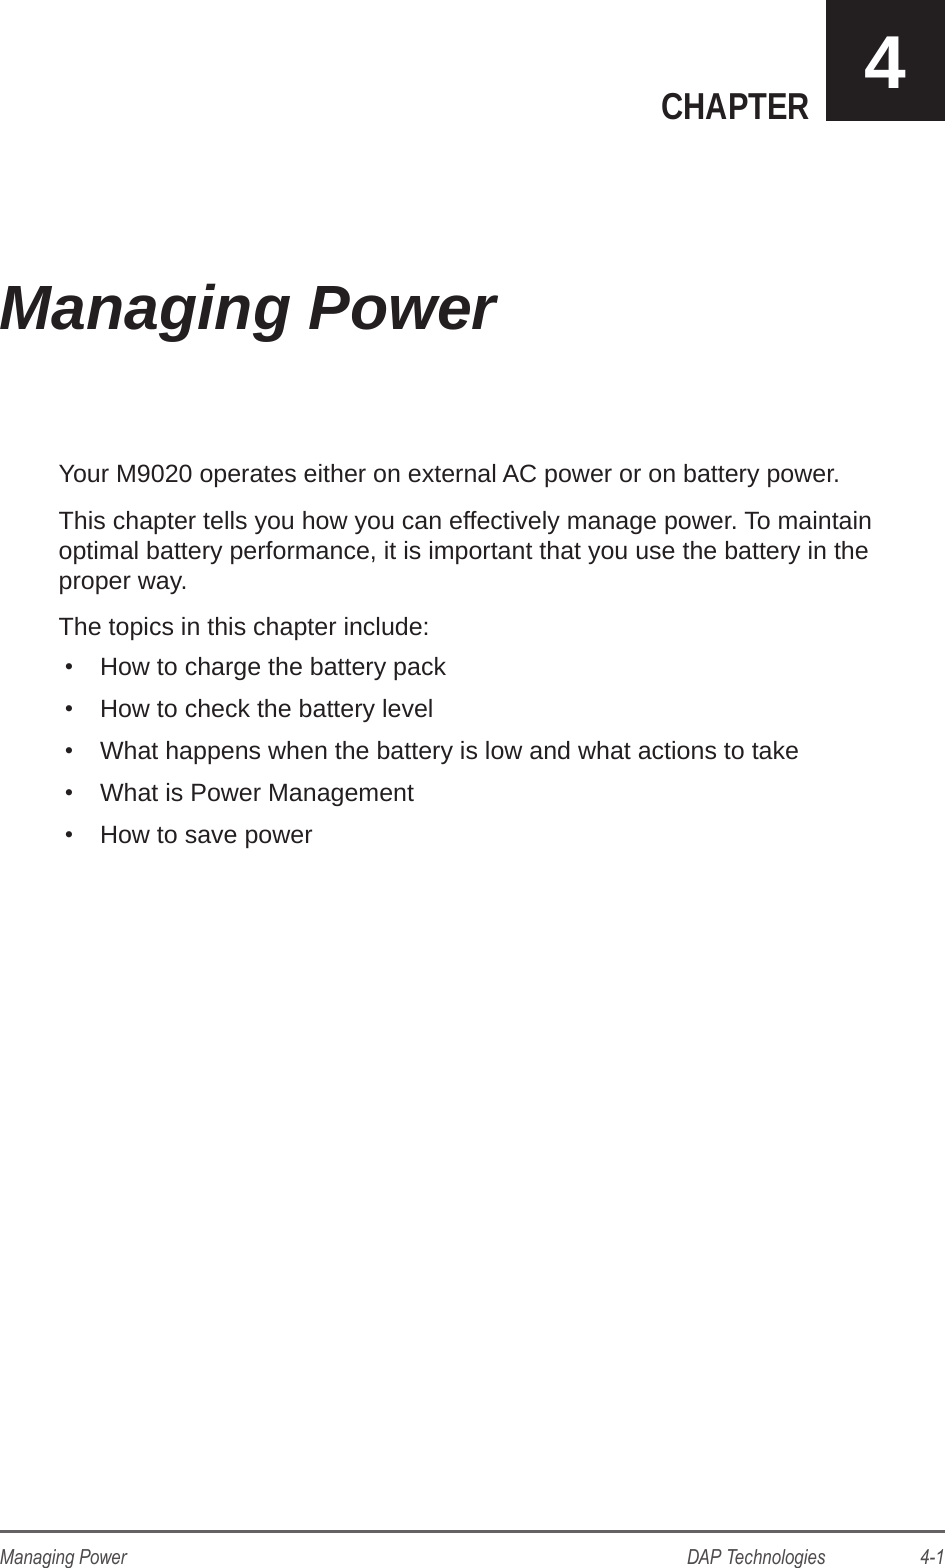 DAP Technologies                    4-1Managing PowerCHAPTER 4Your M9020 operates either on external AC power or on battery power. This chapter tells you how you can effectively manage power. To maintain optimal battery performance, it is important that you use the battery in the proper way.The topics in this chapter include:•  How to charge the battery pack•  How to check the battery level•  What happens when the battery is low and what actions to take•  What is Power Management•  How to save powerManaging Power